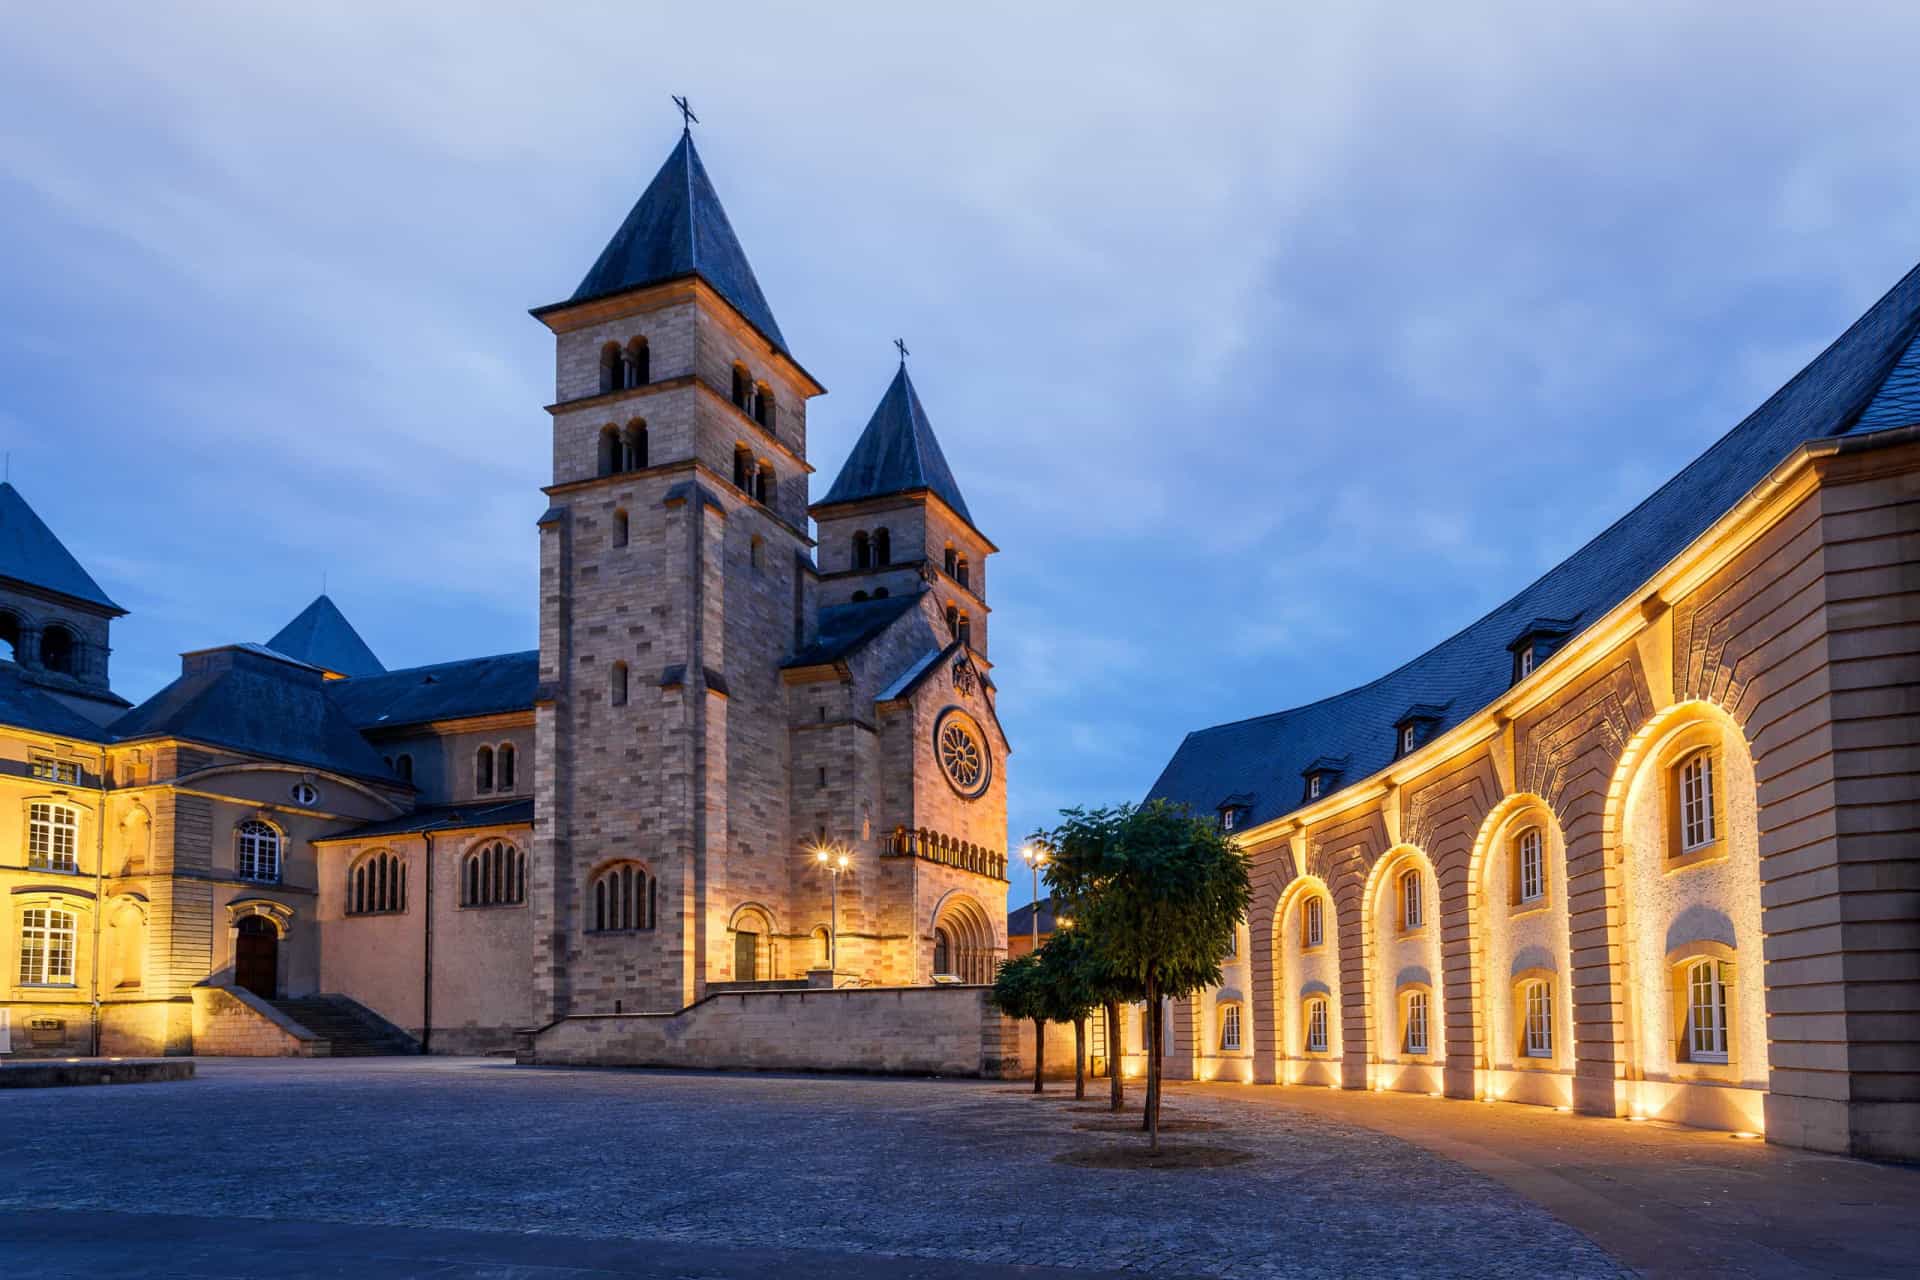 <p>Echternach's standout visitor attraction is its abbey, a 7th-century Benedictine monastery. The magnificent basilica looms large over a crypt in which is found a beautiful white marble sarcophagus containing the remains of St. Willibrord (658–739), the founder of the abbey and patron saint of Luxembourg.</p>